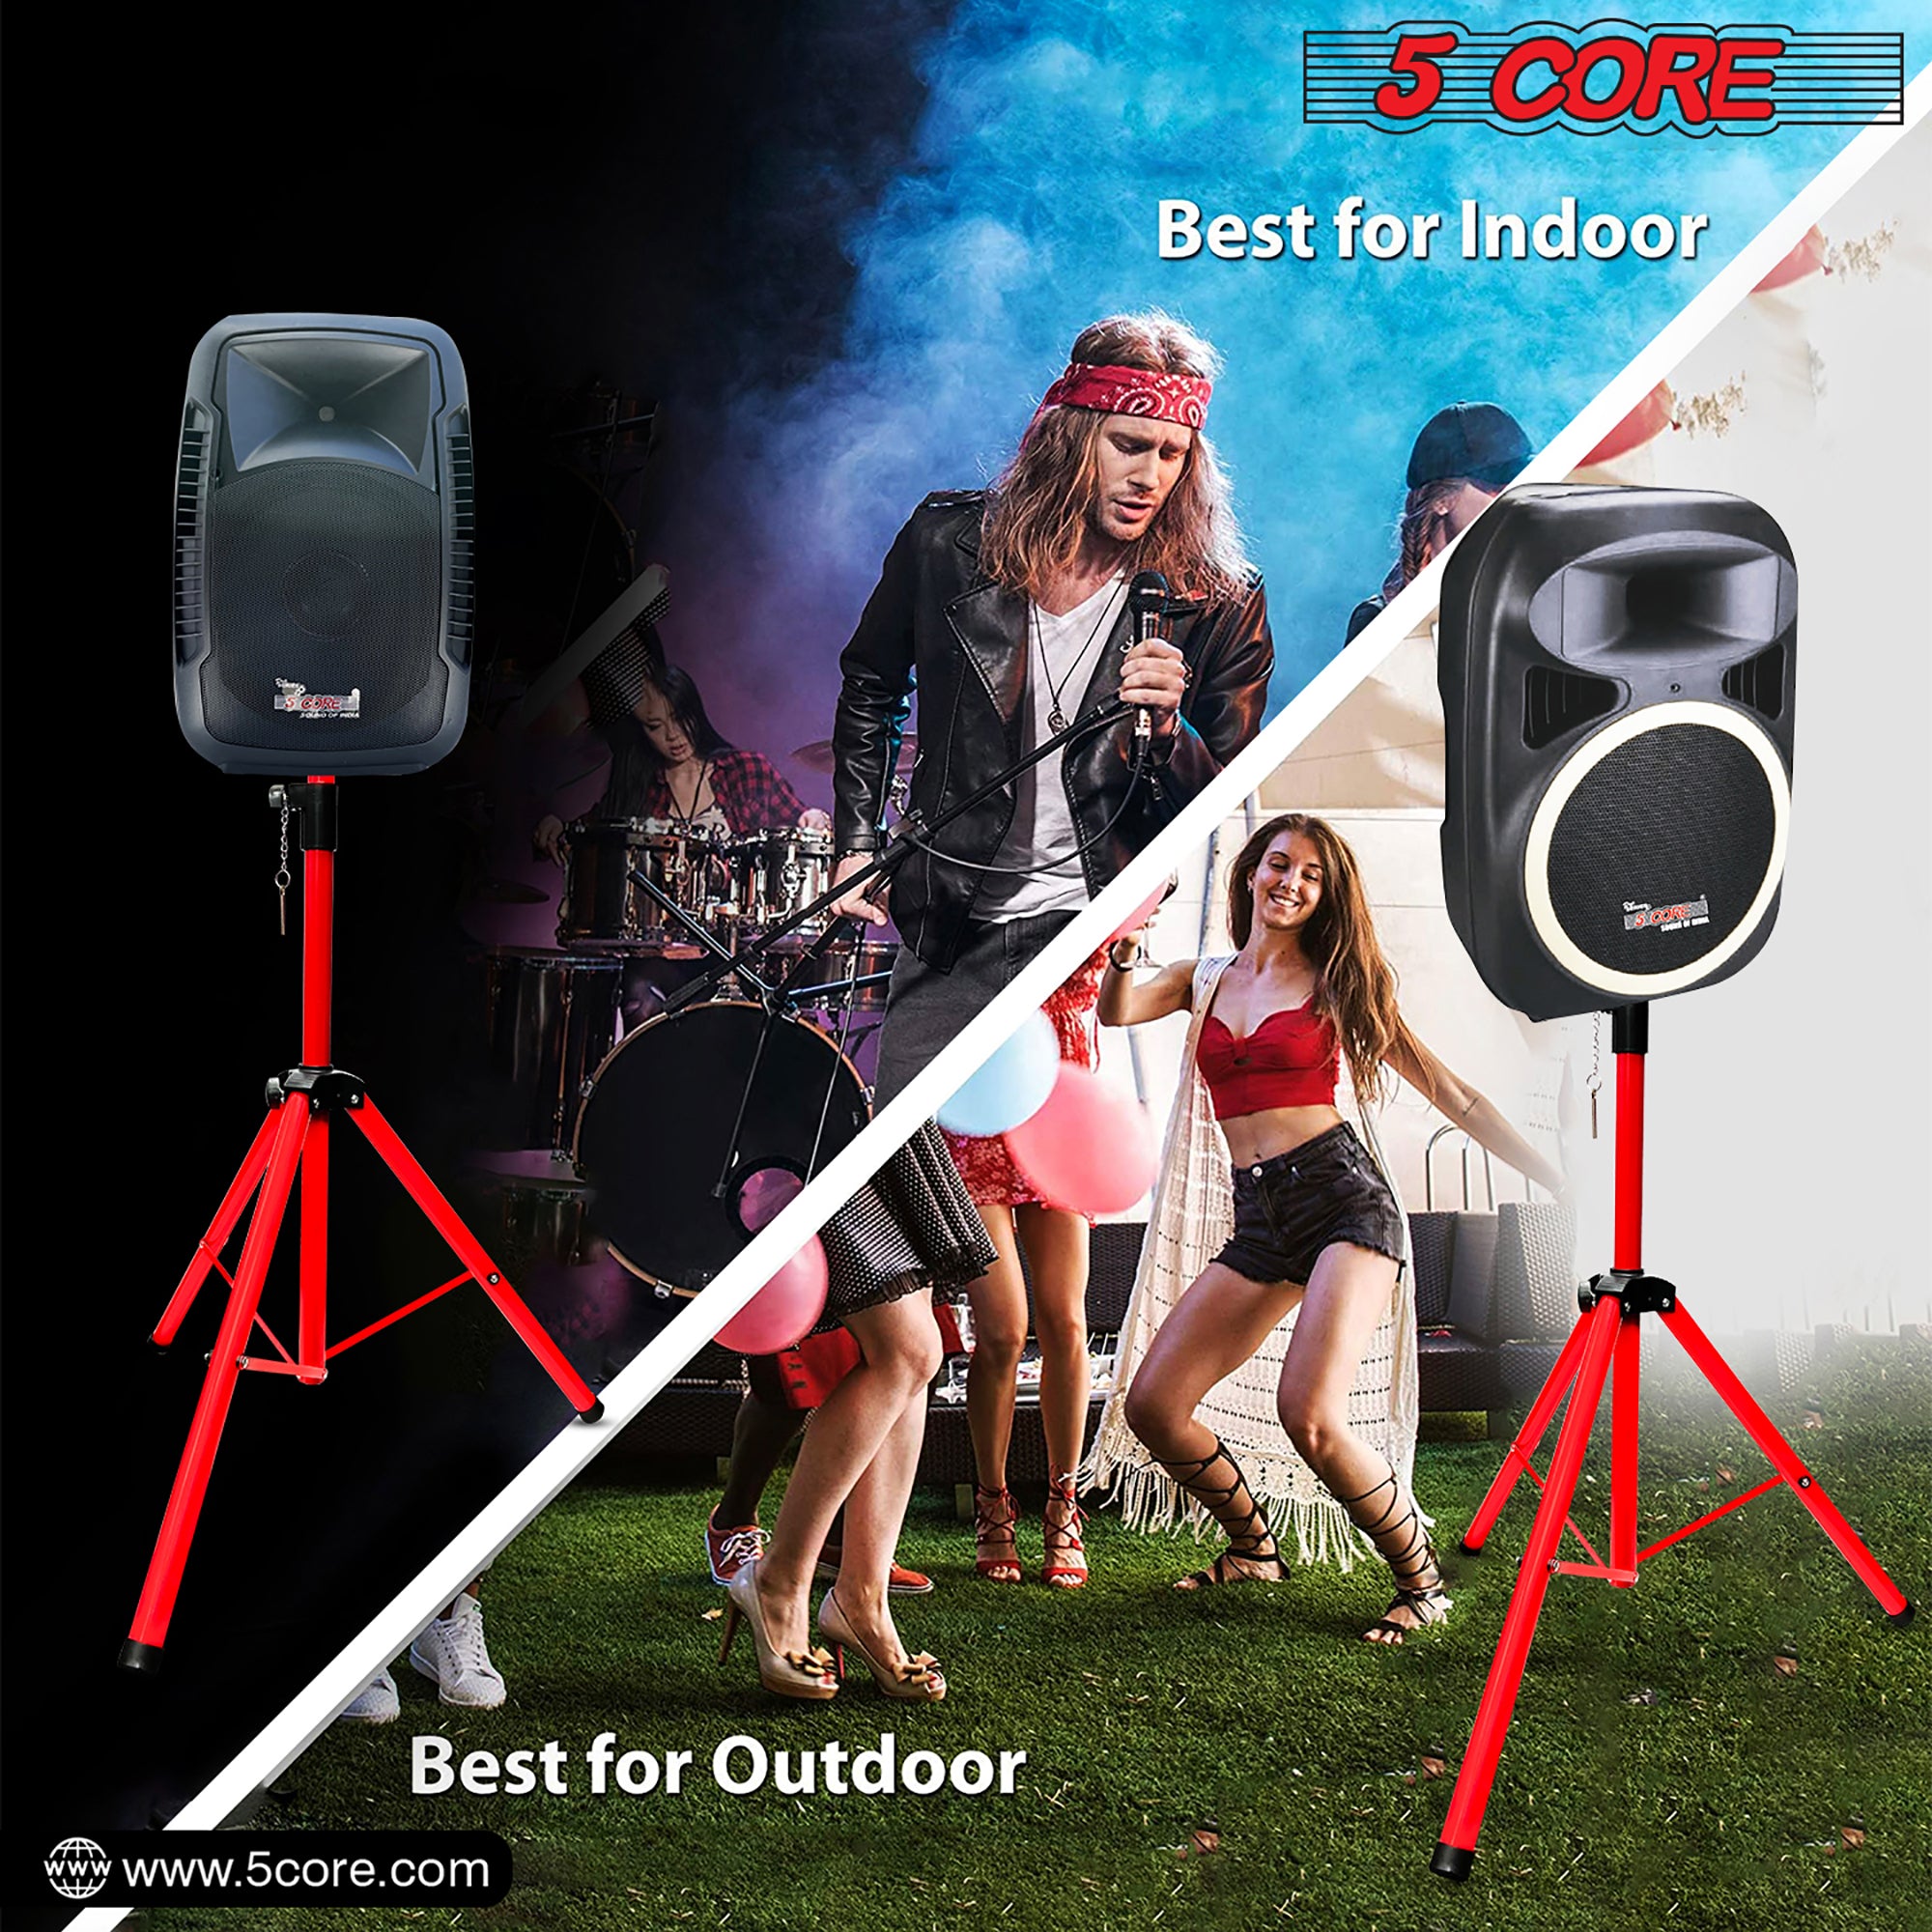 Durable construction and stability of this Speaker Stand make it suitable for any environment.